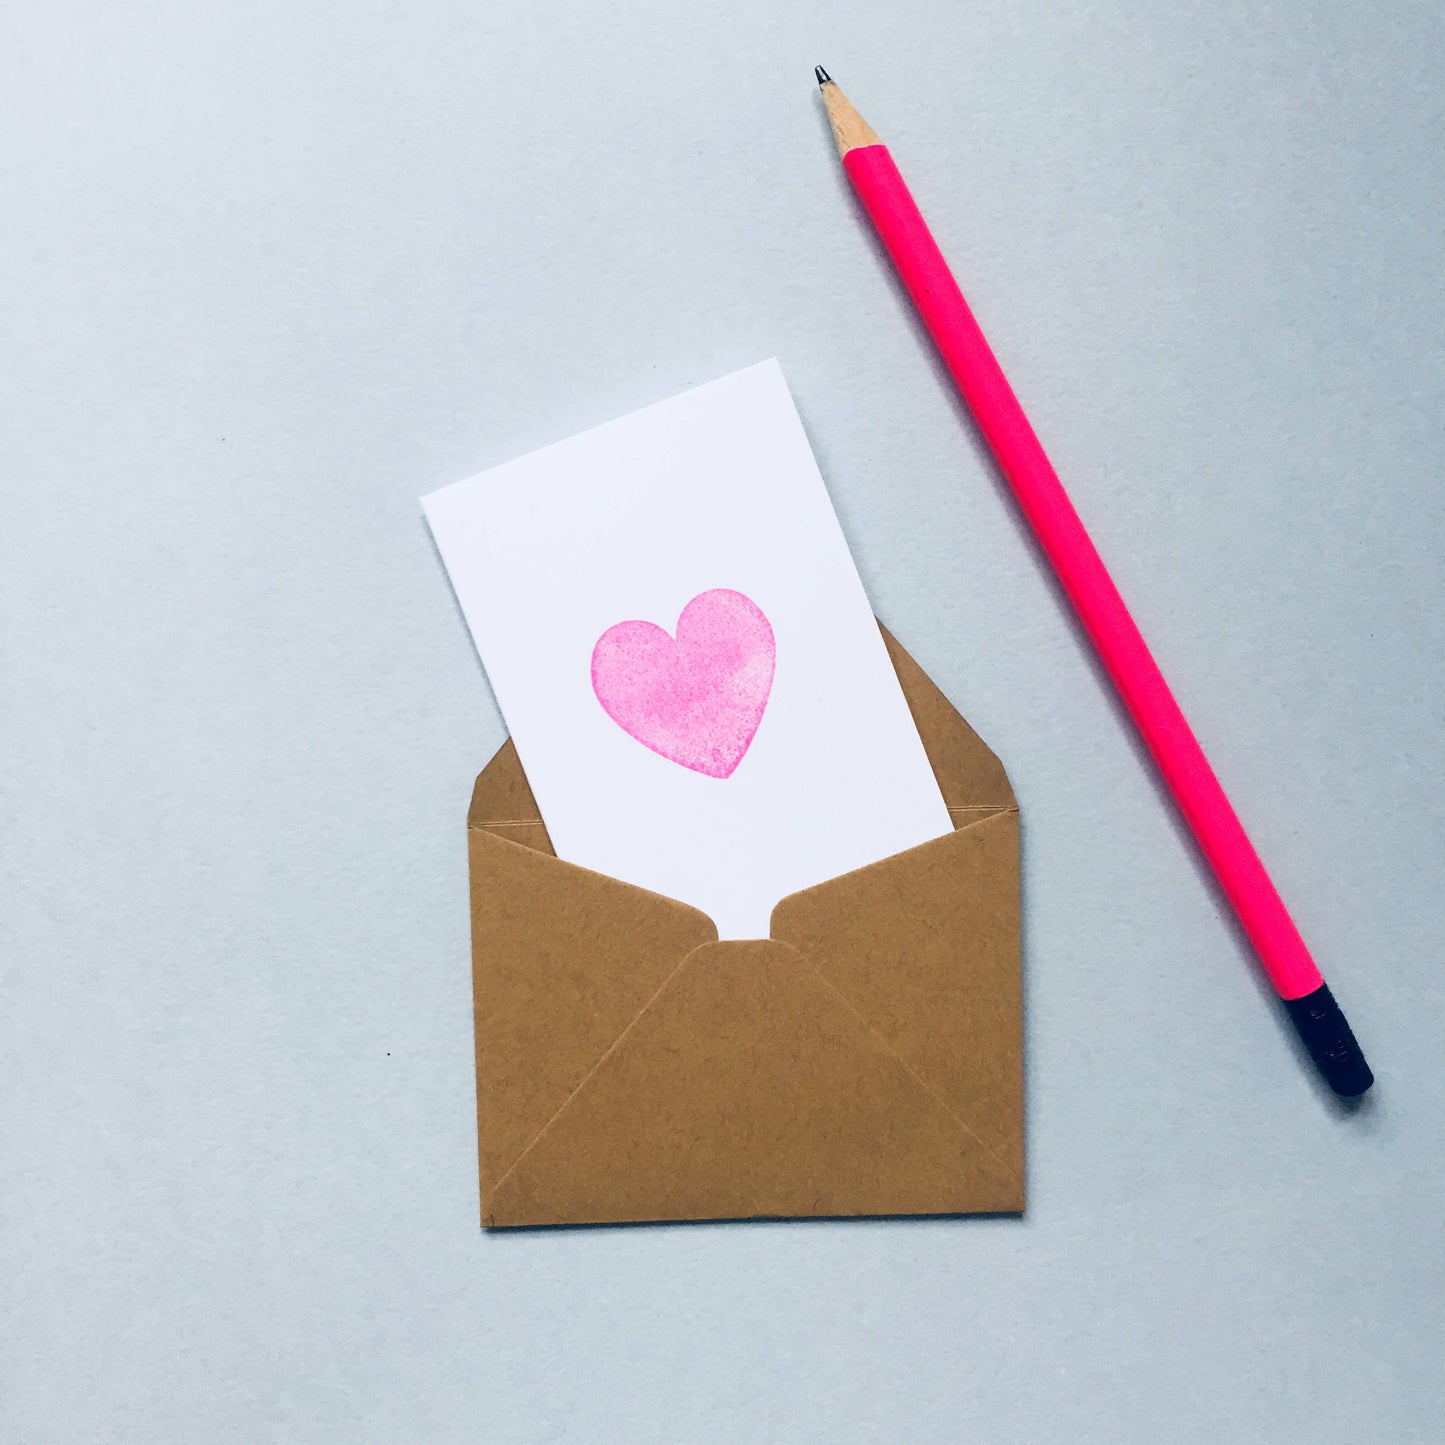 MINI HEART CARD SET- Pink Hand Stamped Heart